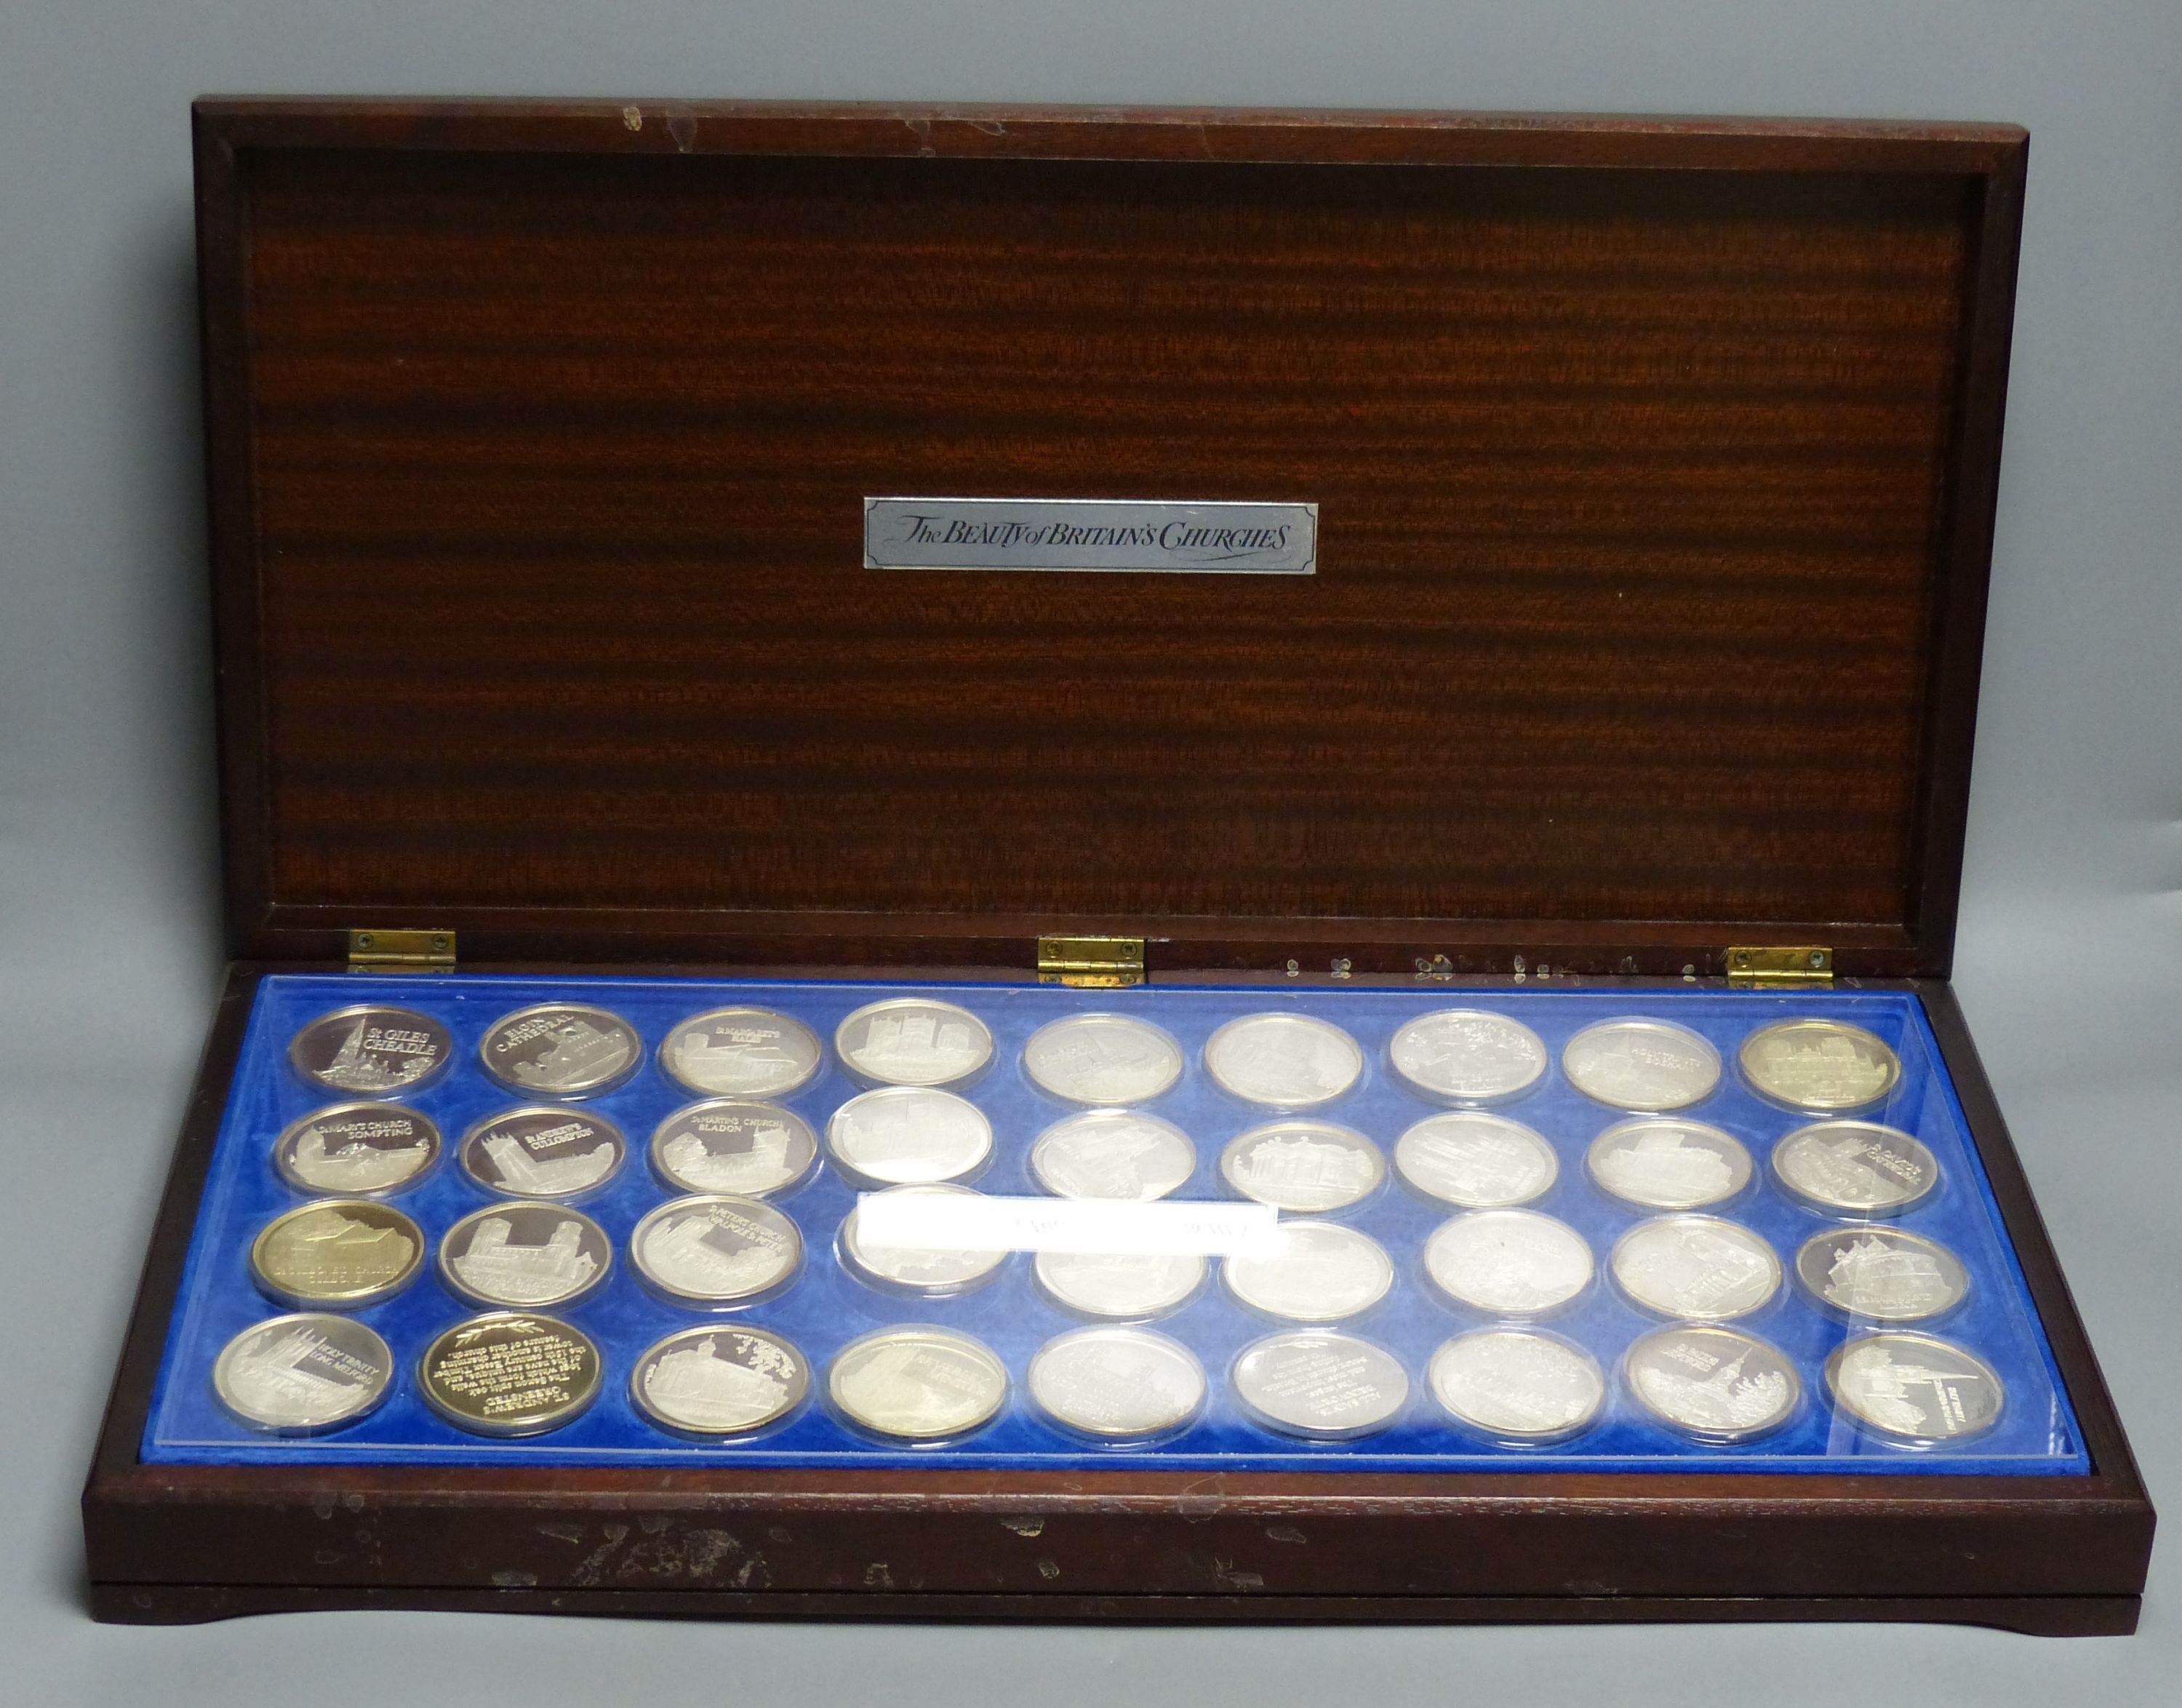 A cased set of 36 silver 'The Beauty of British Churches' medallions,